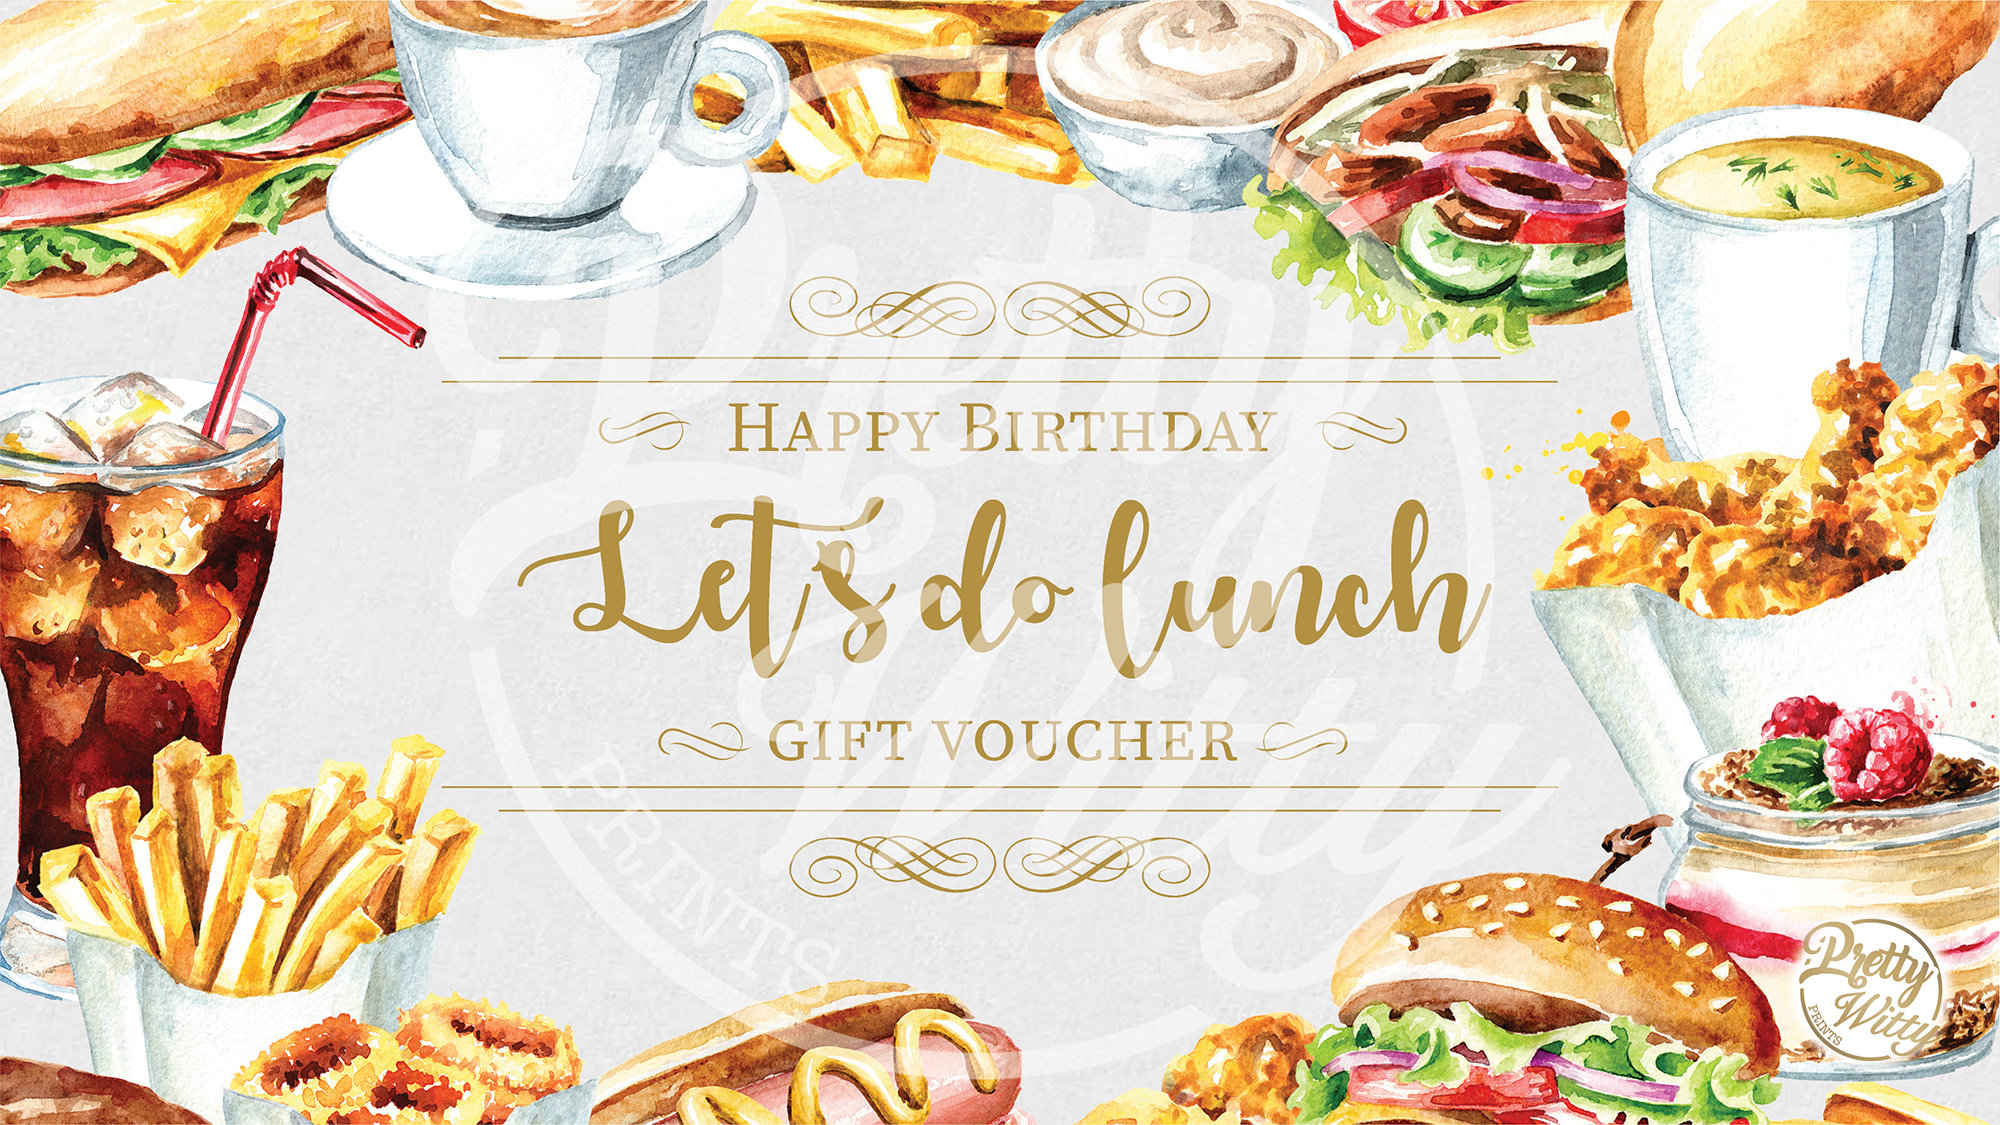 birthday-lunch-voucher-printable-gift-instant-download-a4-printable